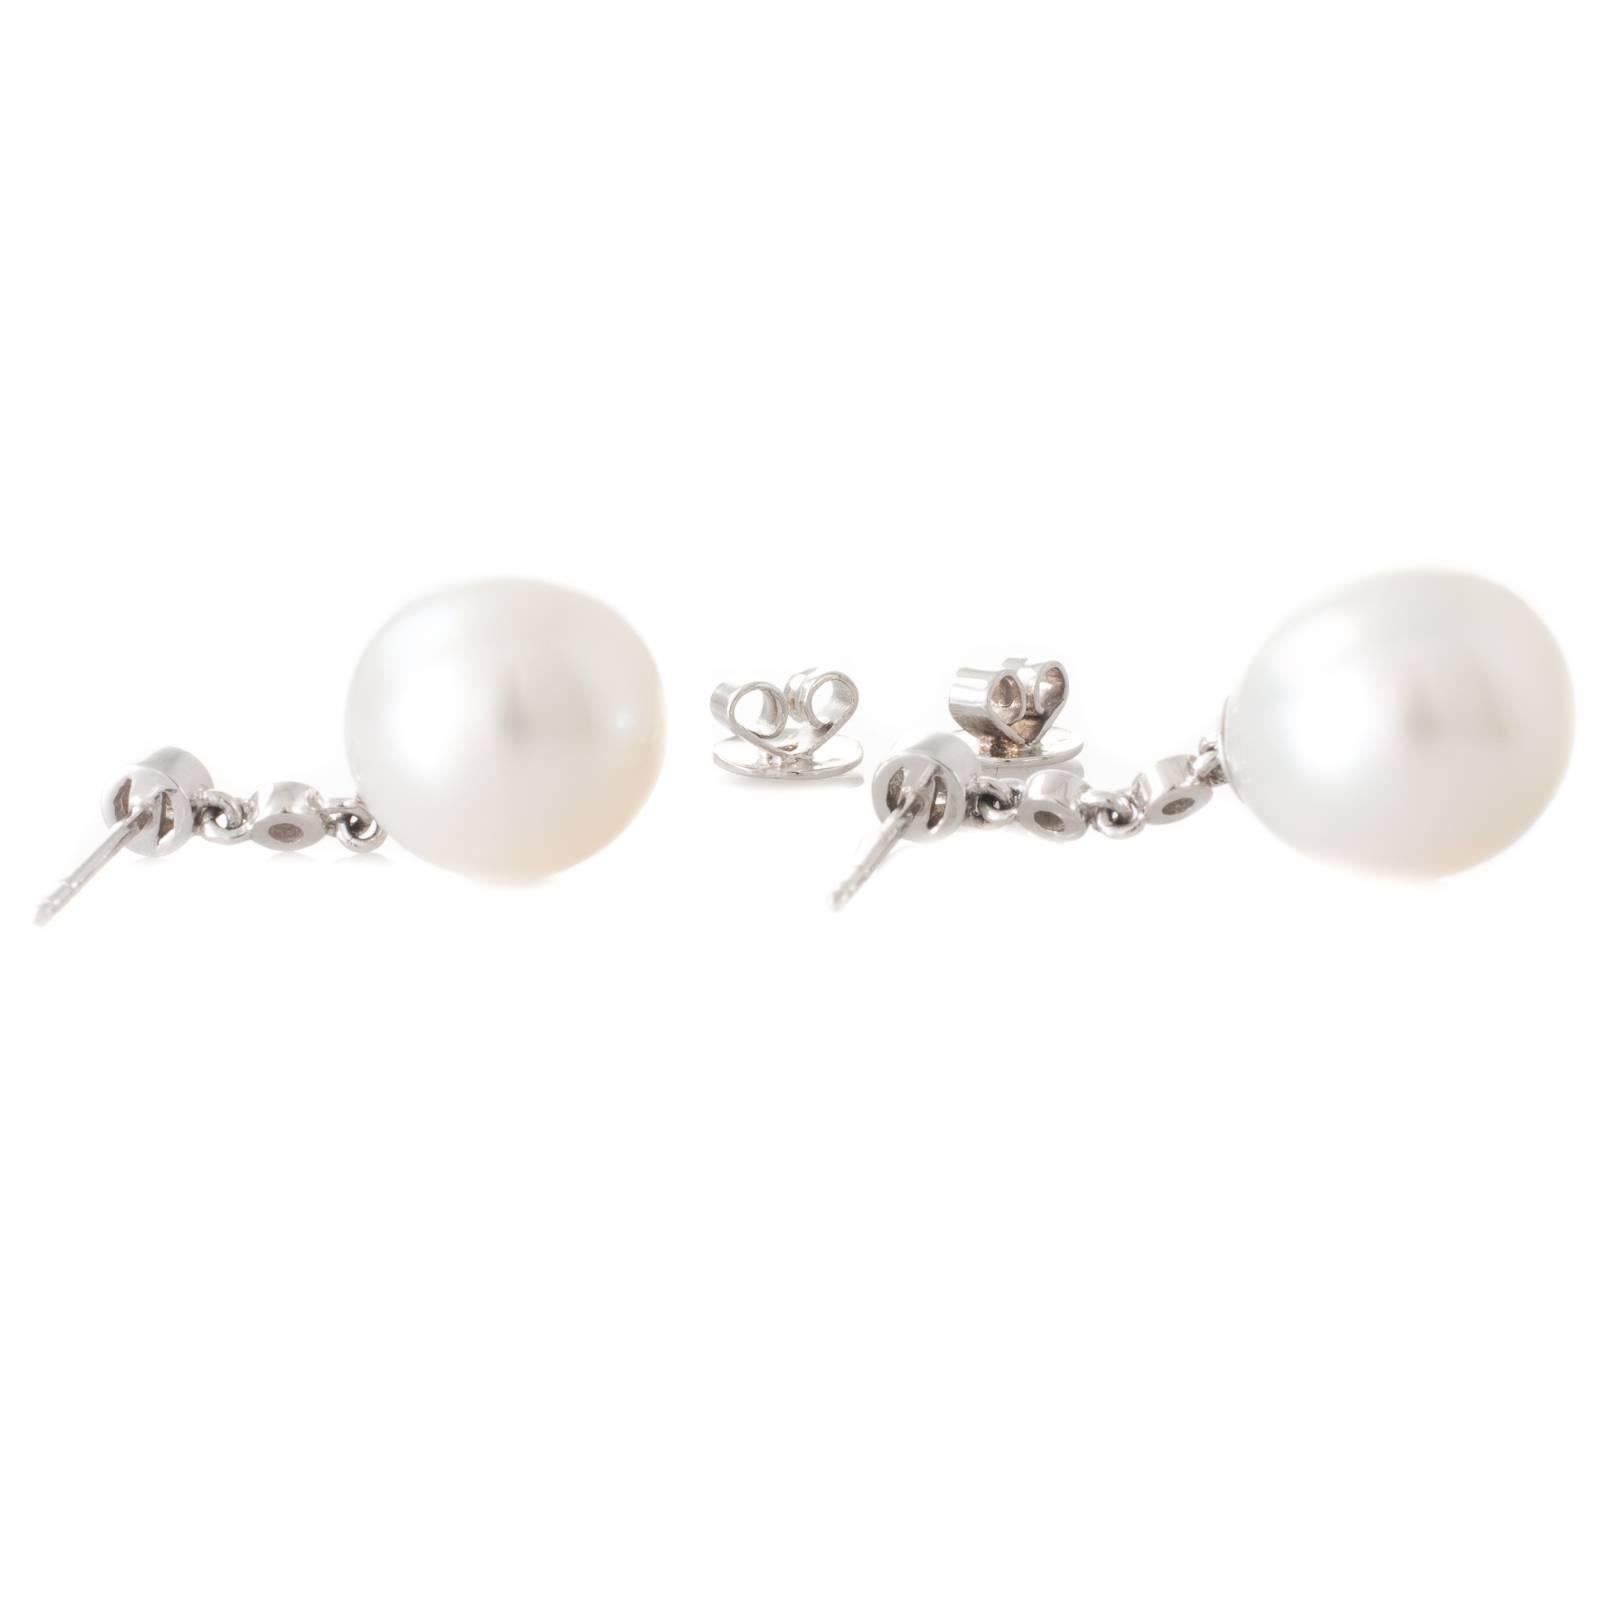 A pair of drop shaped Australian white South Sea pearl and bezel diamond drop earrings in 9ct white gold with pearls measuring 11.5 - 13.5mm with a good lustre and few natural surface marks.  
Total Diamond Weight: 0.36ct